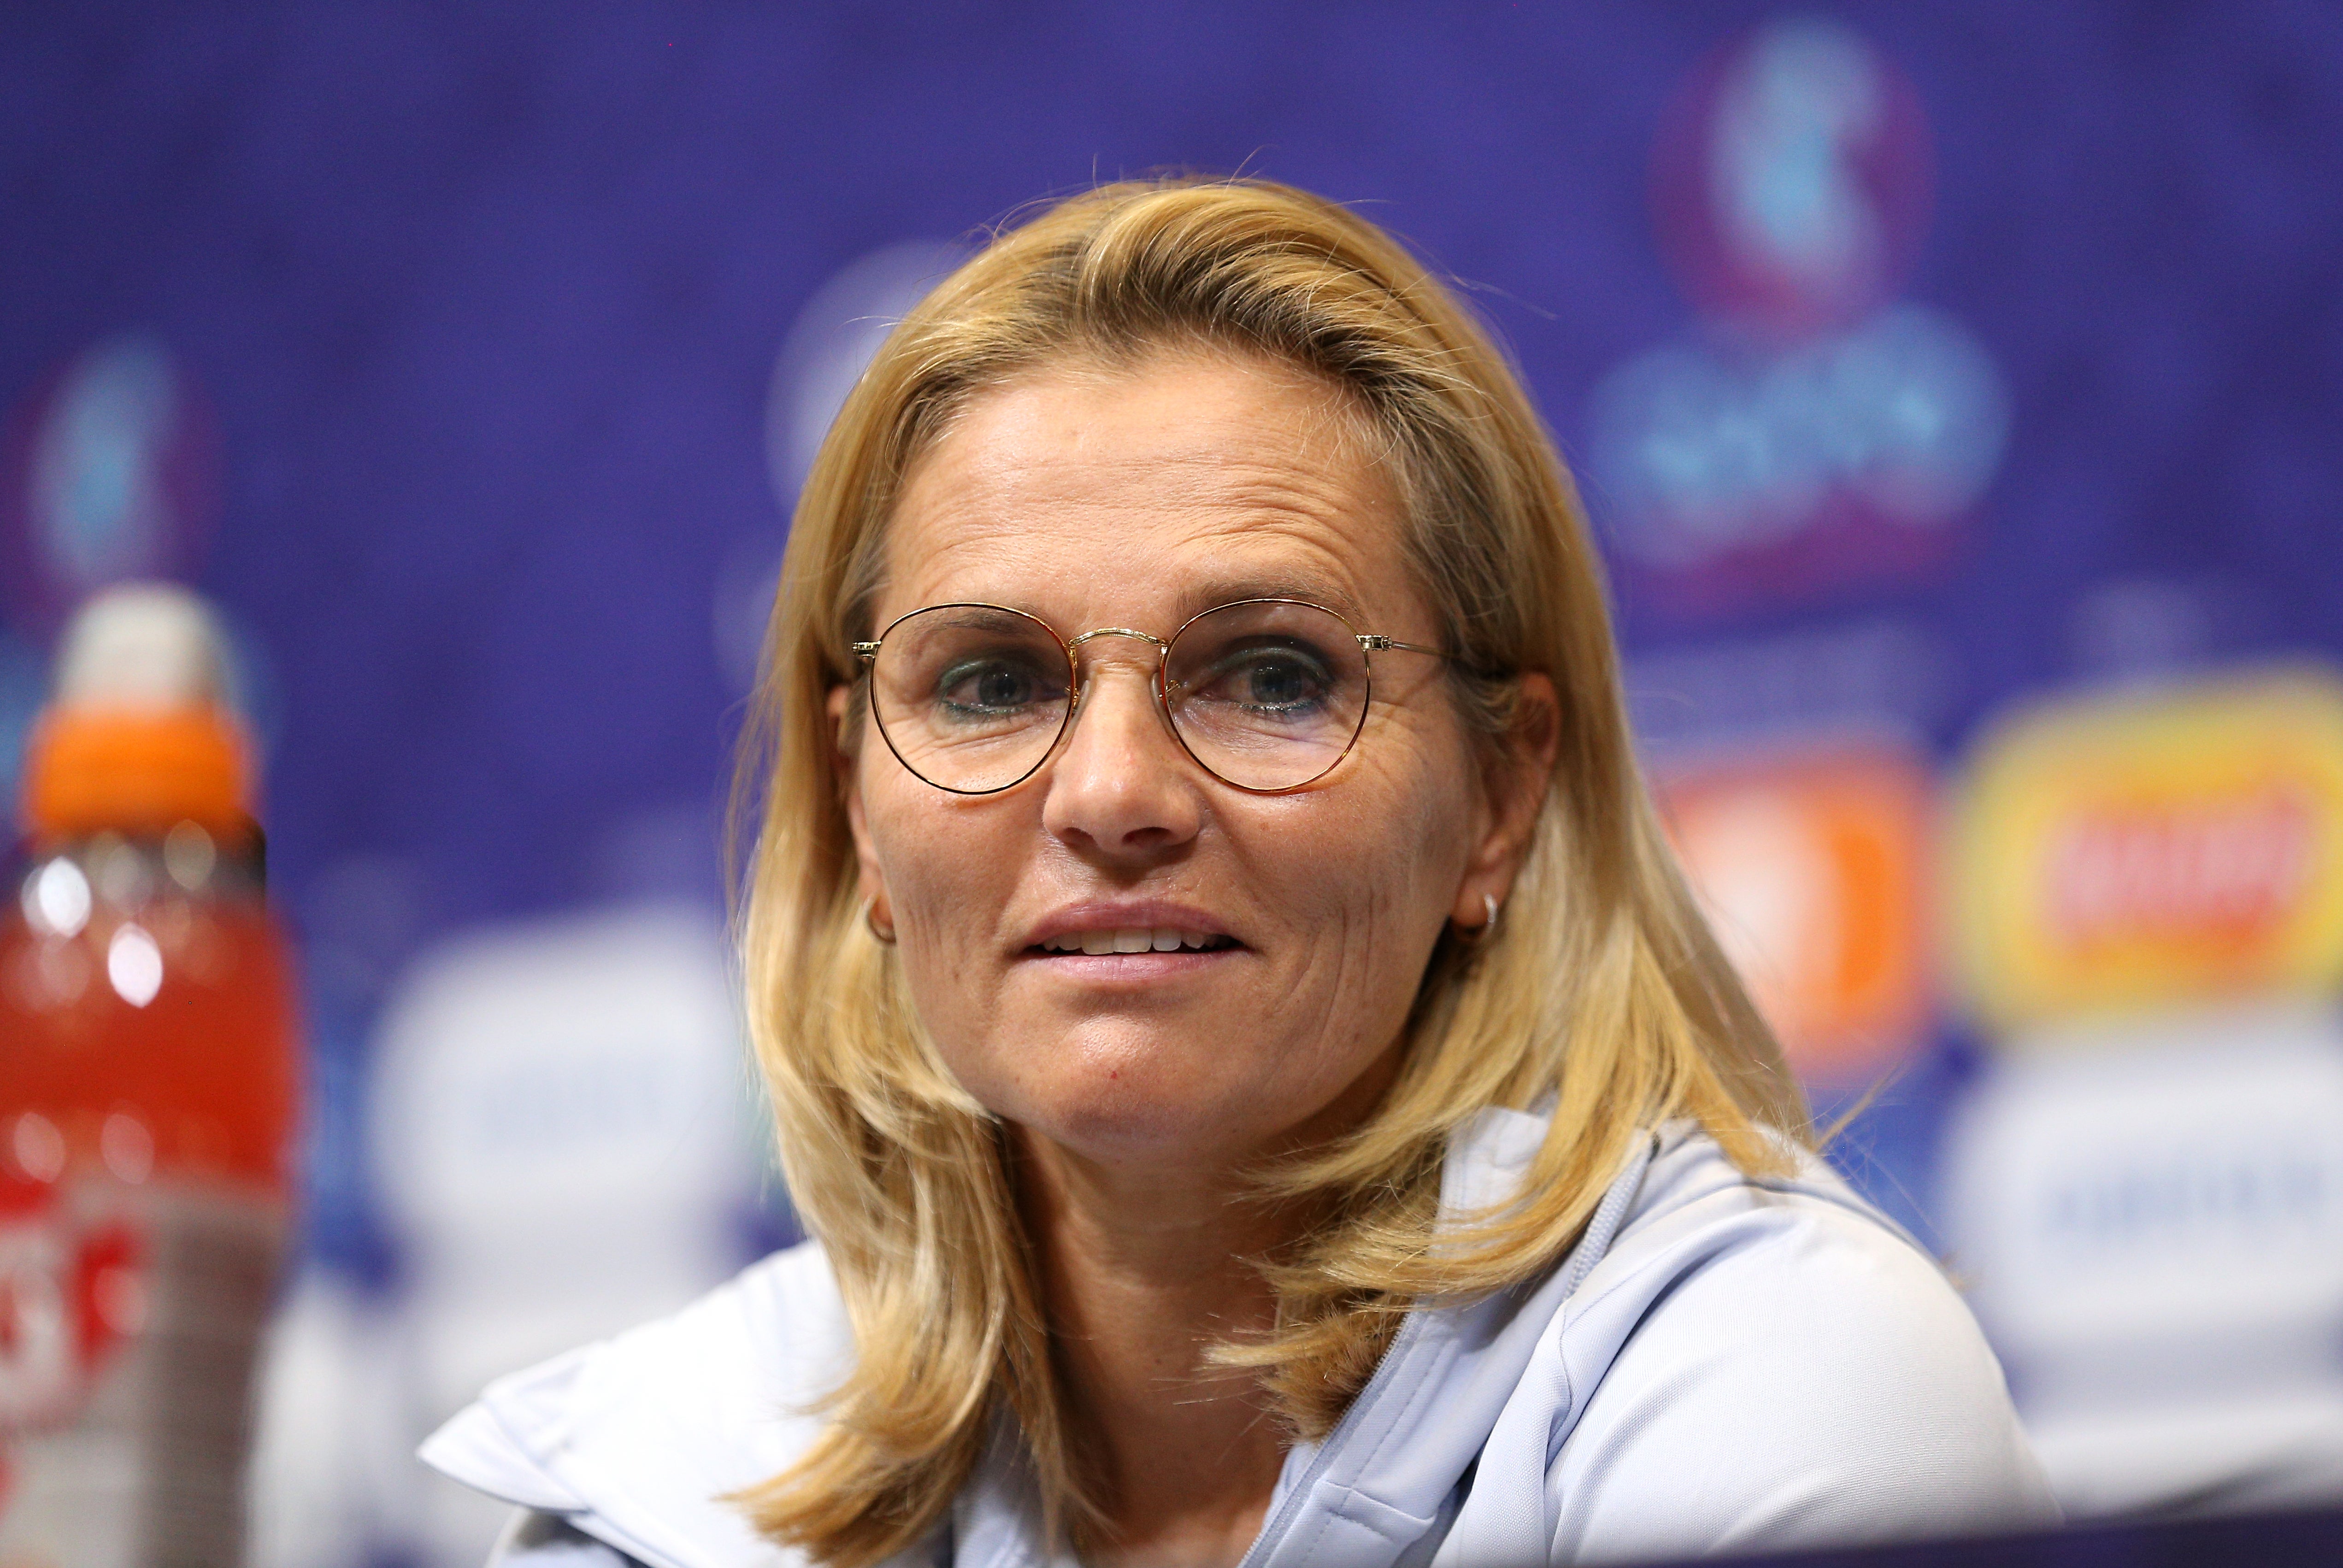 Sarina Wiegman admits England have been practising penalties (Nigel French/PA)